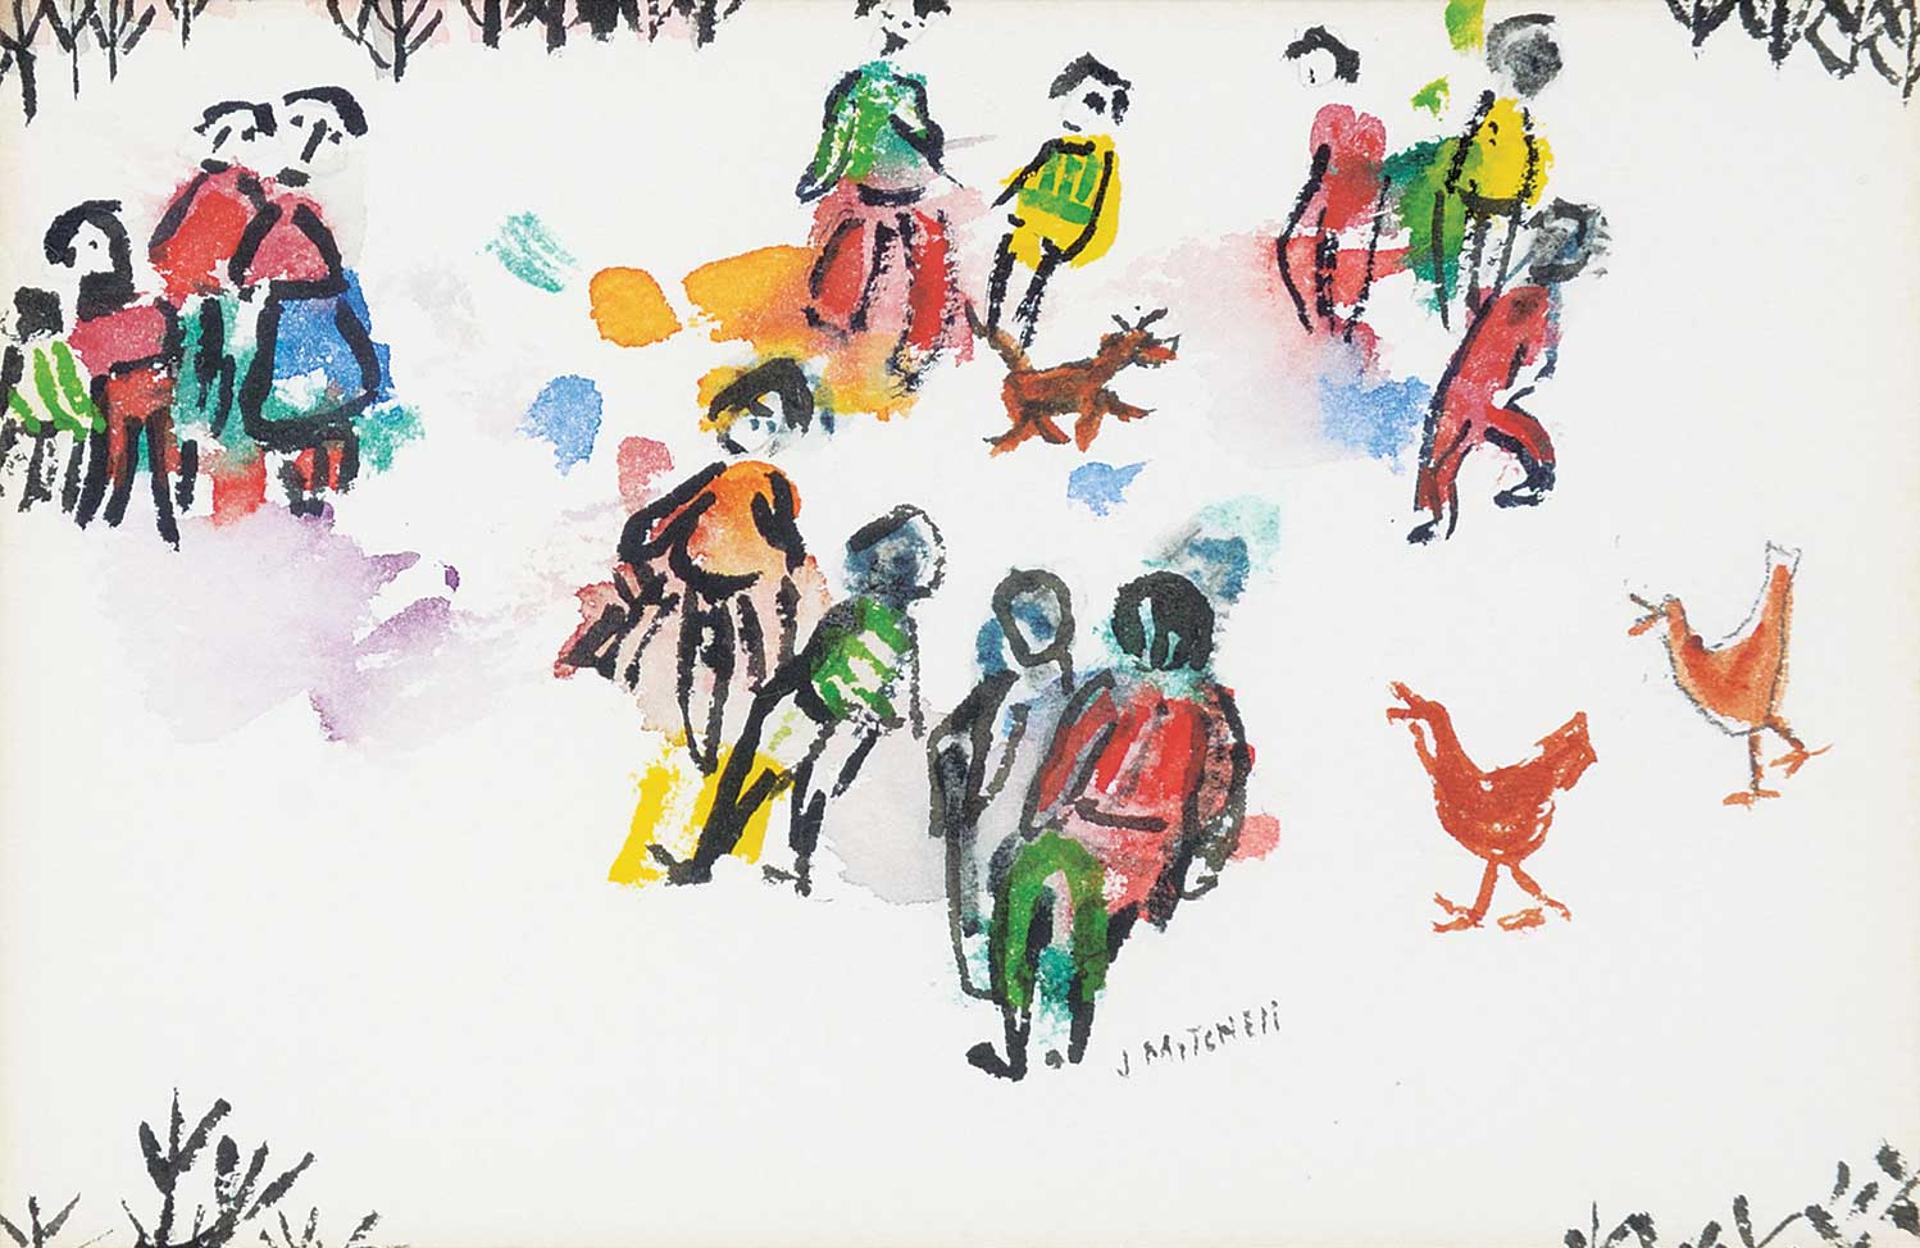 Janet Mitchell (1915-1998) - Untitled - Gathering at the Park